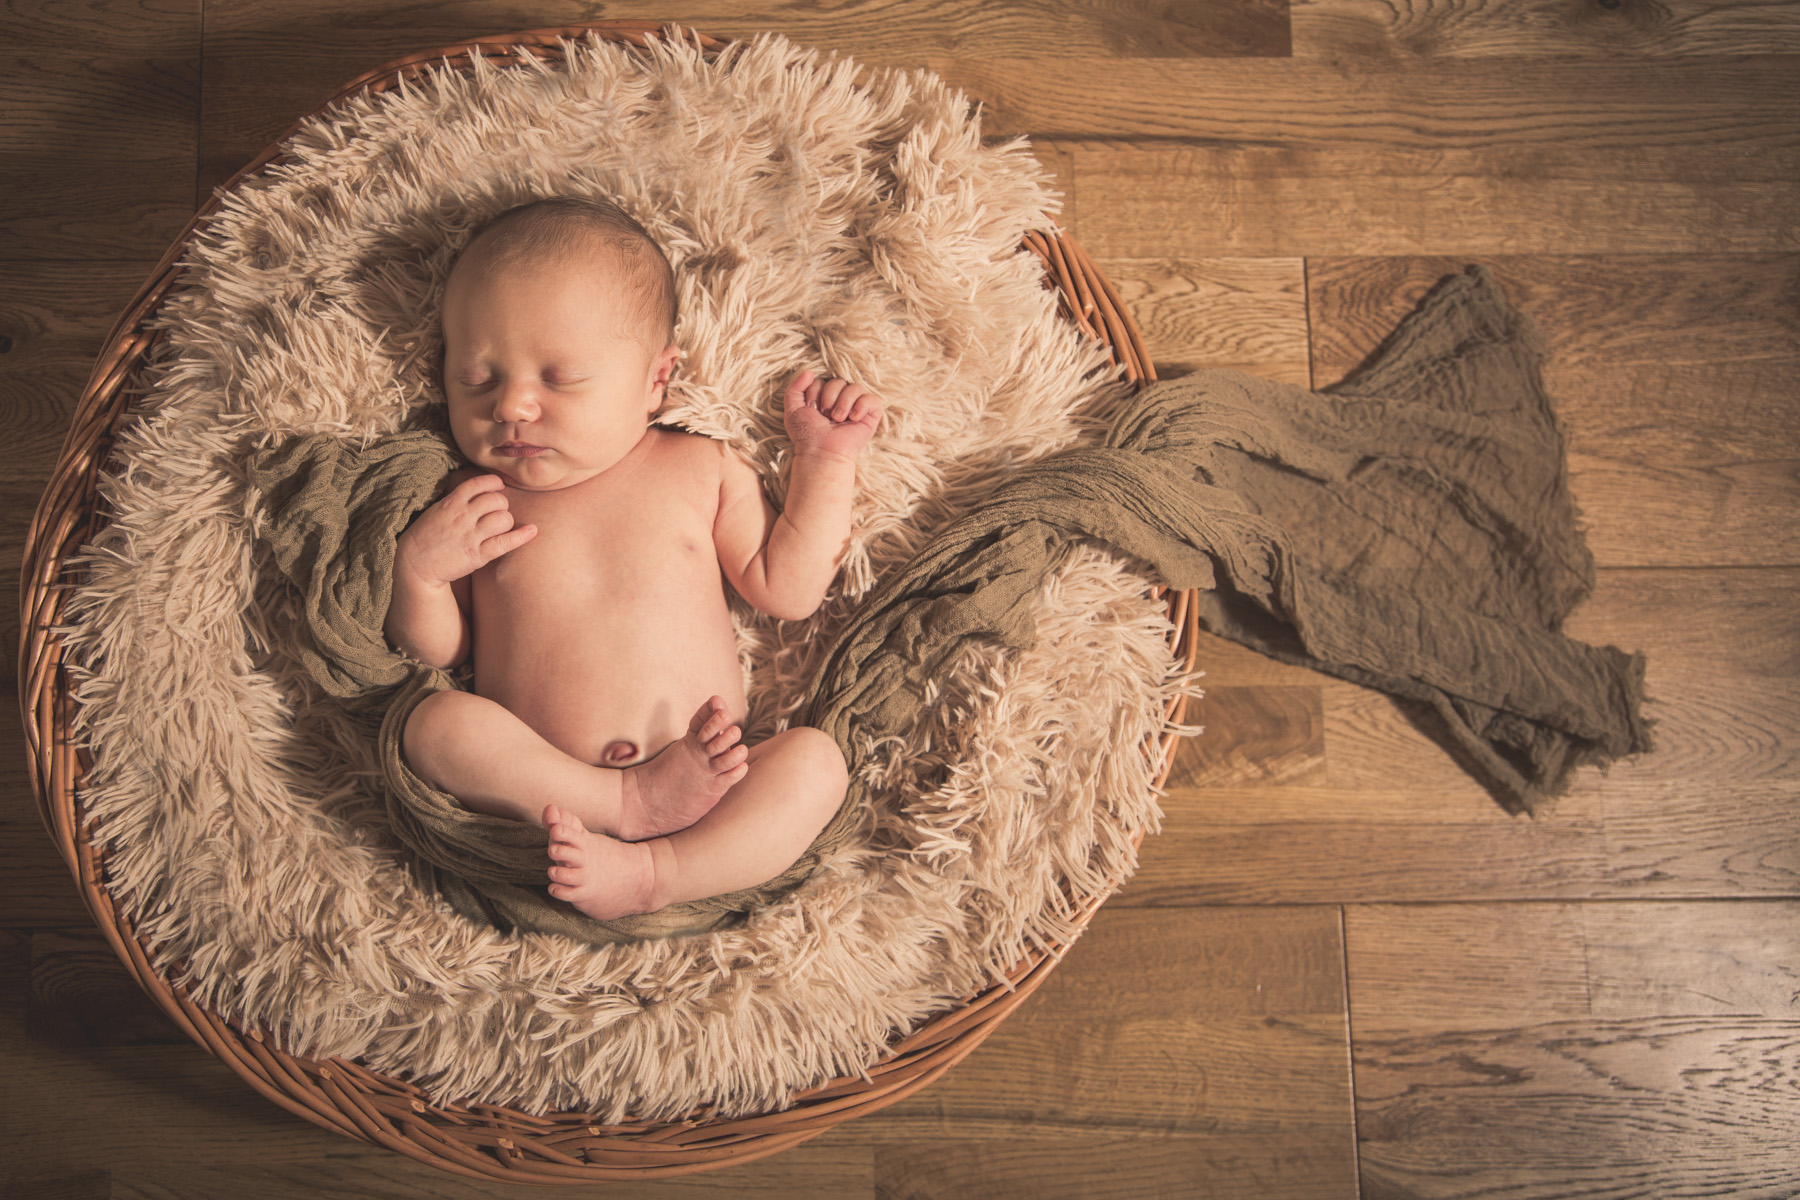 baby in basket photography